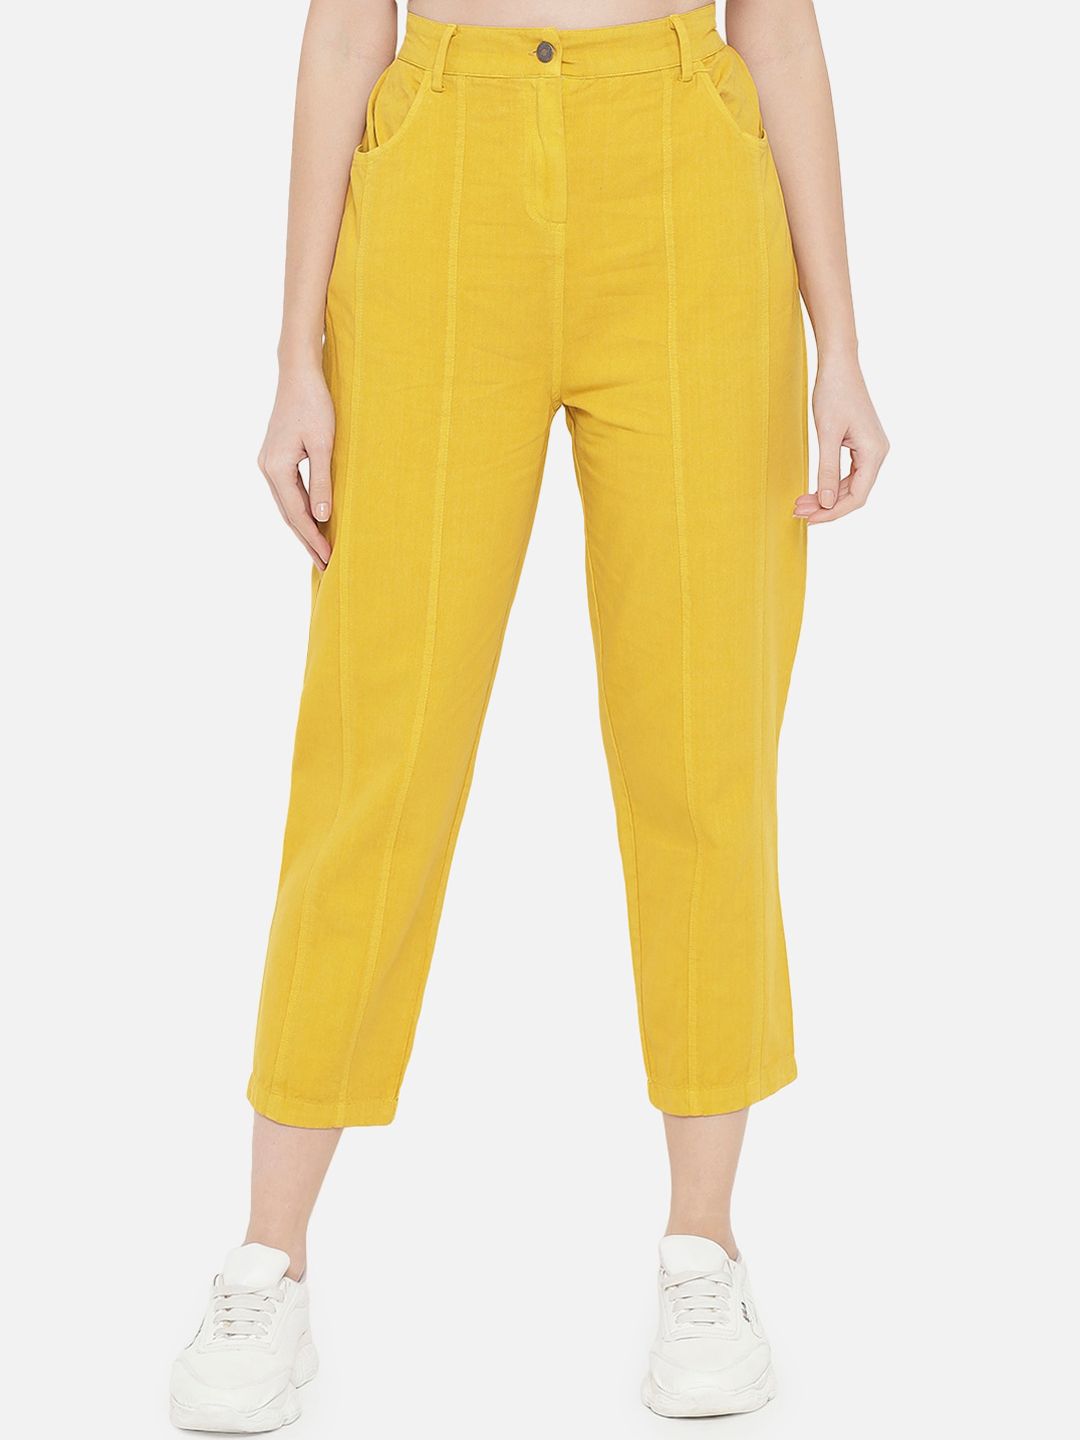 Orchid Blues Women Yellow High-Rise Jeans Price in India